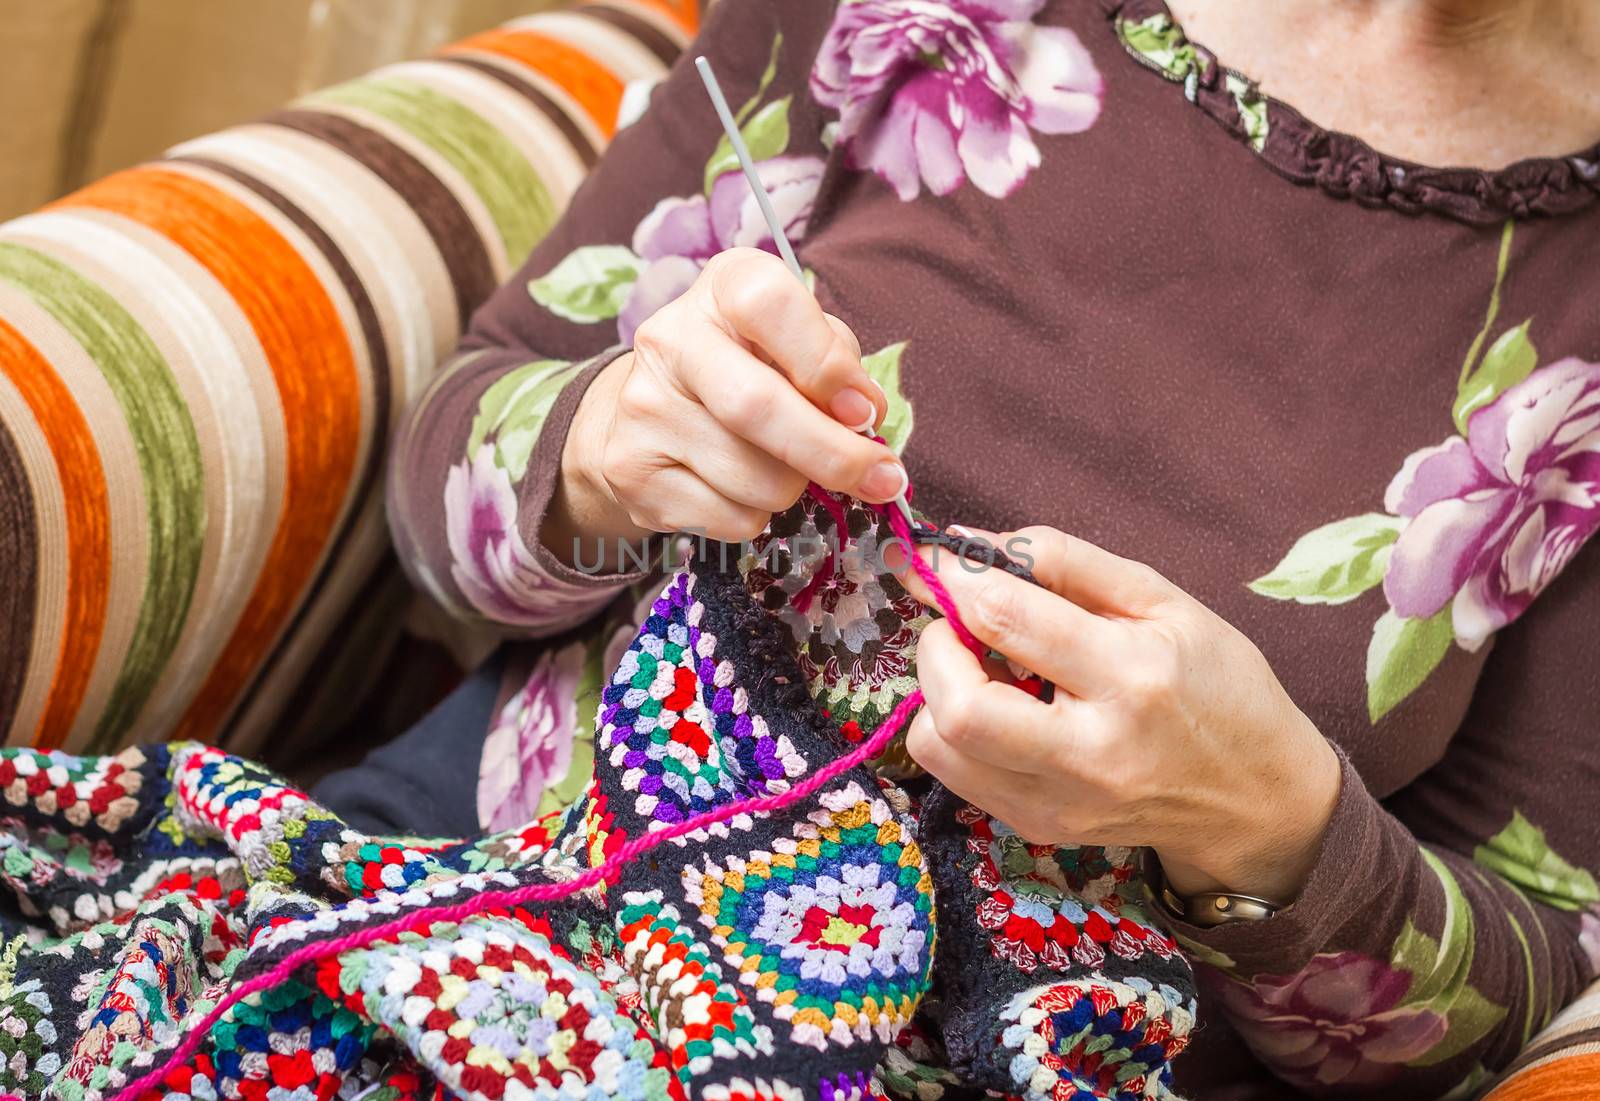 Hands of senior woman knitting a vintage wool quilt with colorful patches